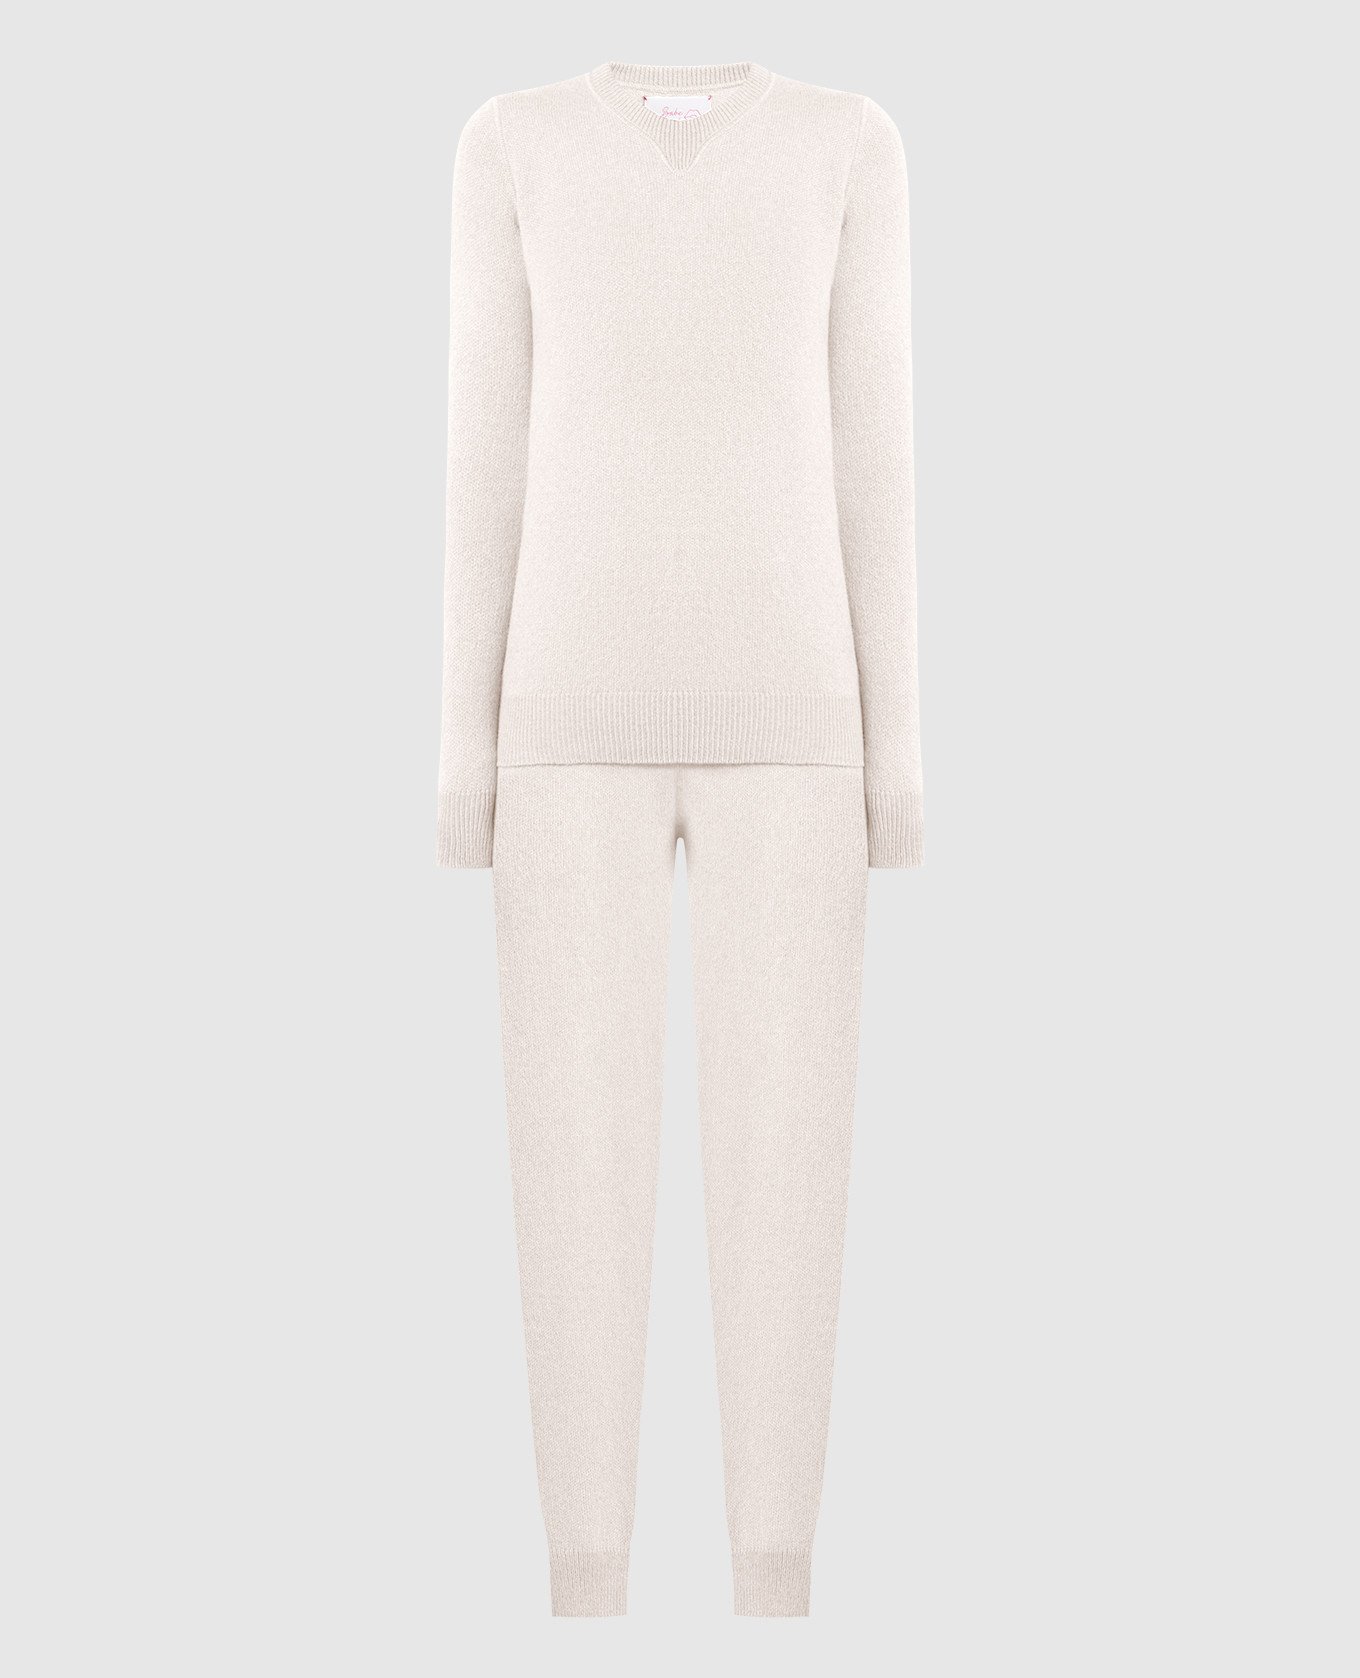 White cashmere sweater and joggers suit